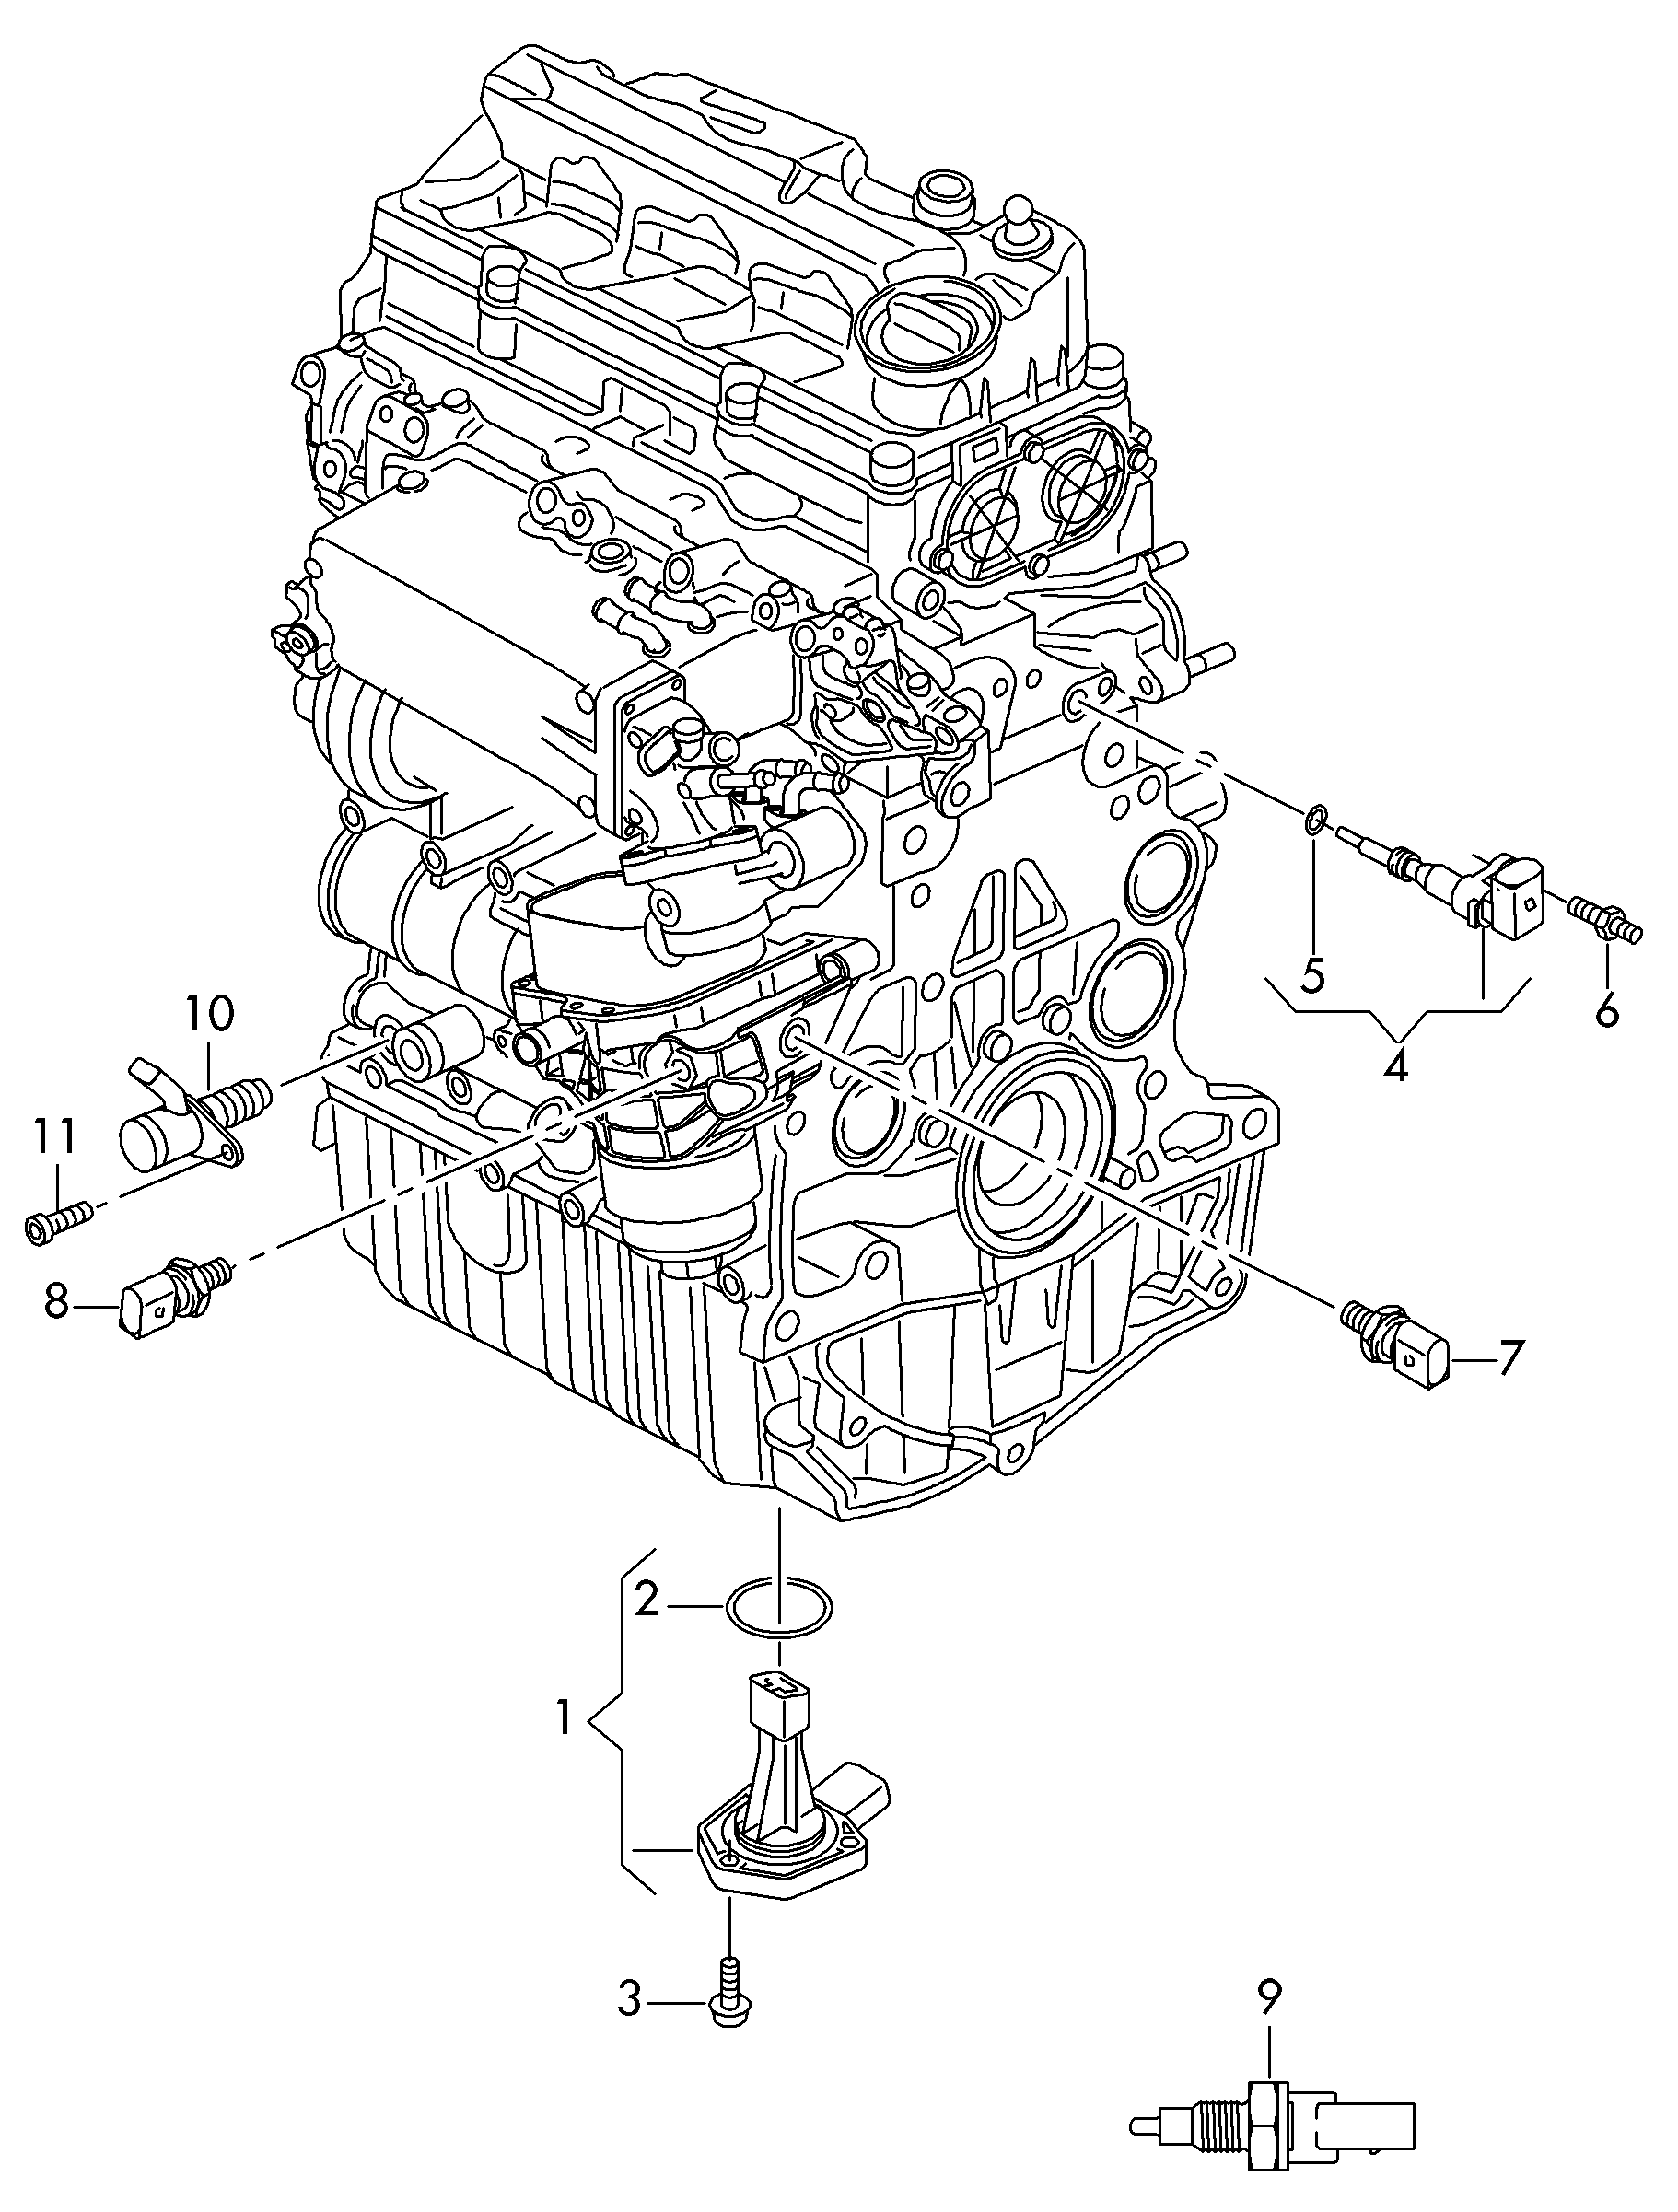 switches and senders on engine
and gearbox - Leon/Leon 4(LE)  